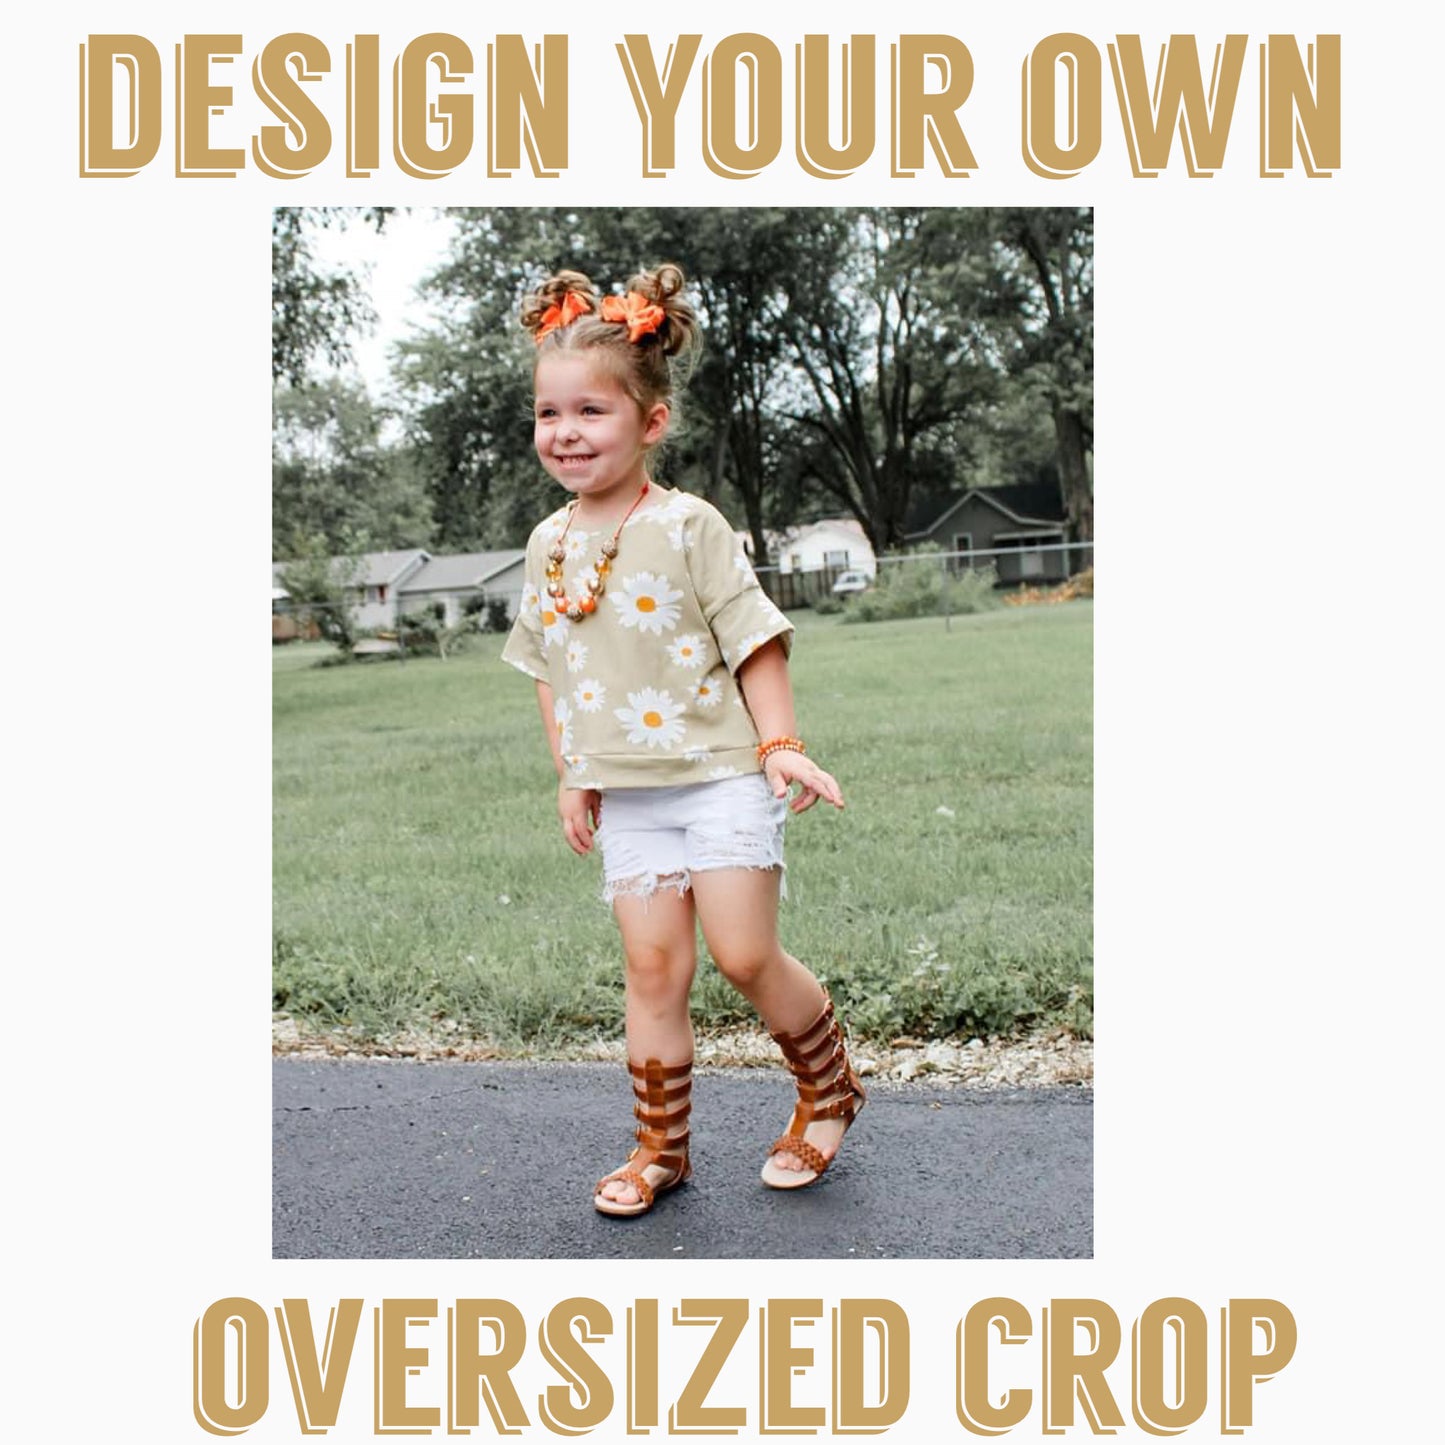 Design your own| Oversized Crop